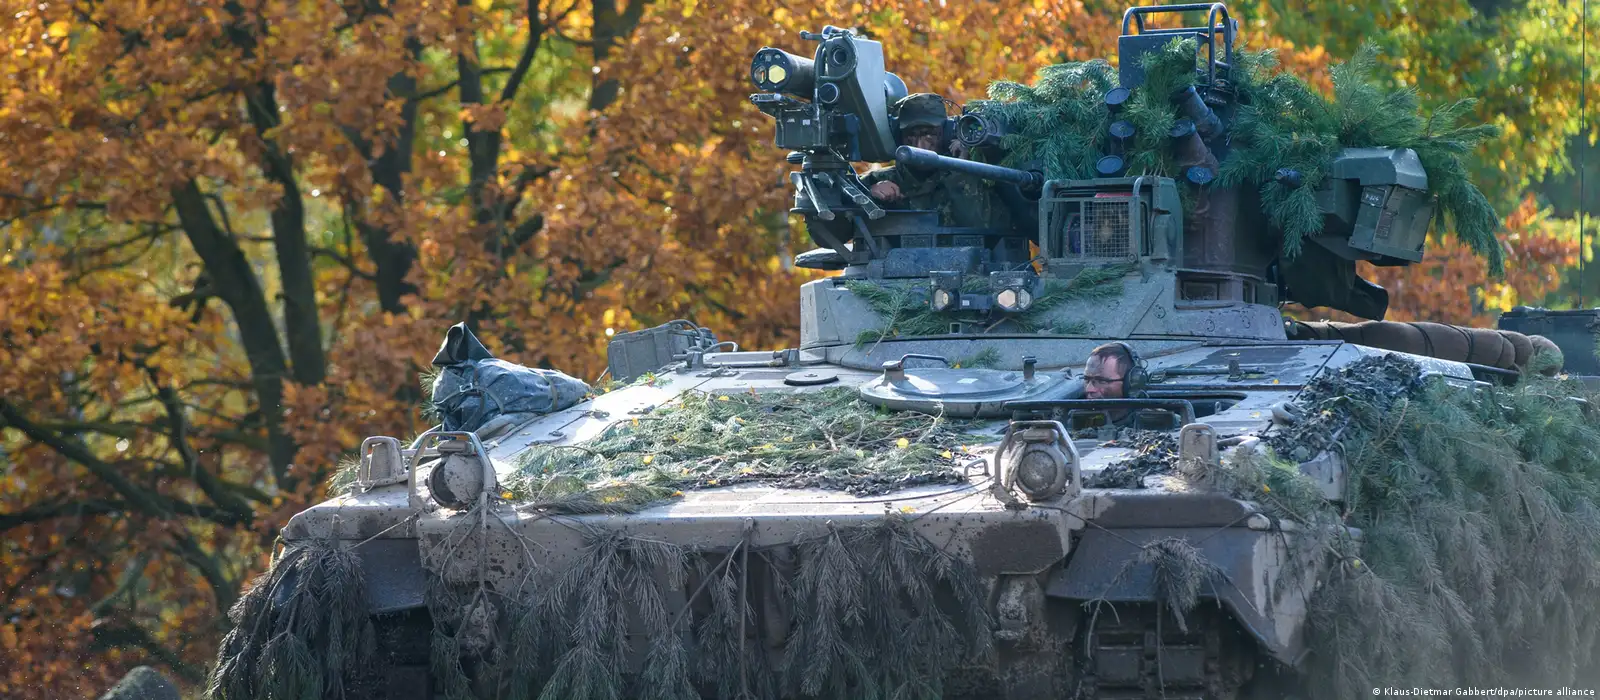 Training on Marder IFV will take place in Germany and will last 8 weeks.  Germany will provide Marder for a bataillon, so around 40 vehicles,  government spokesperson said at Press conference. : r/ukraine